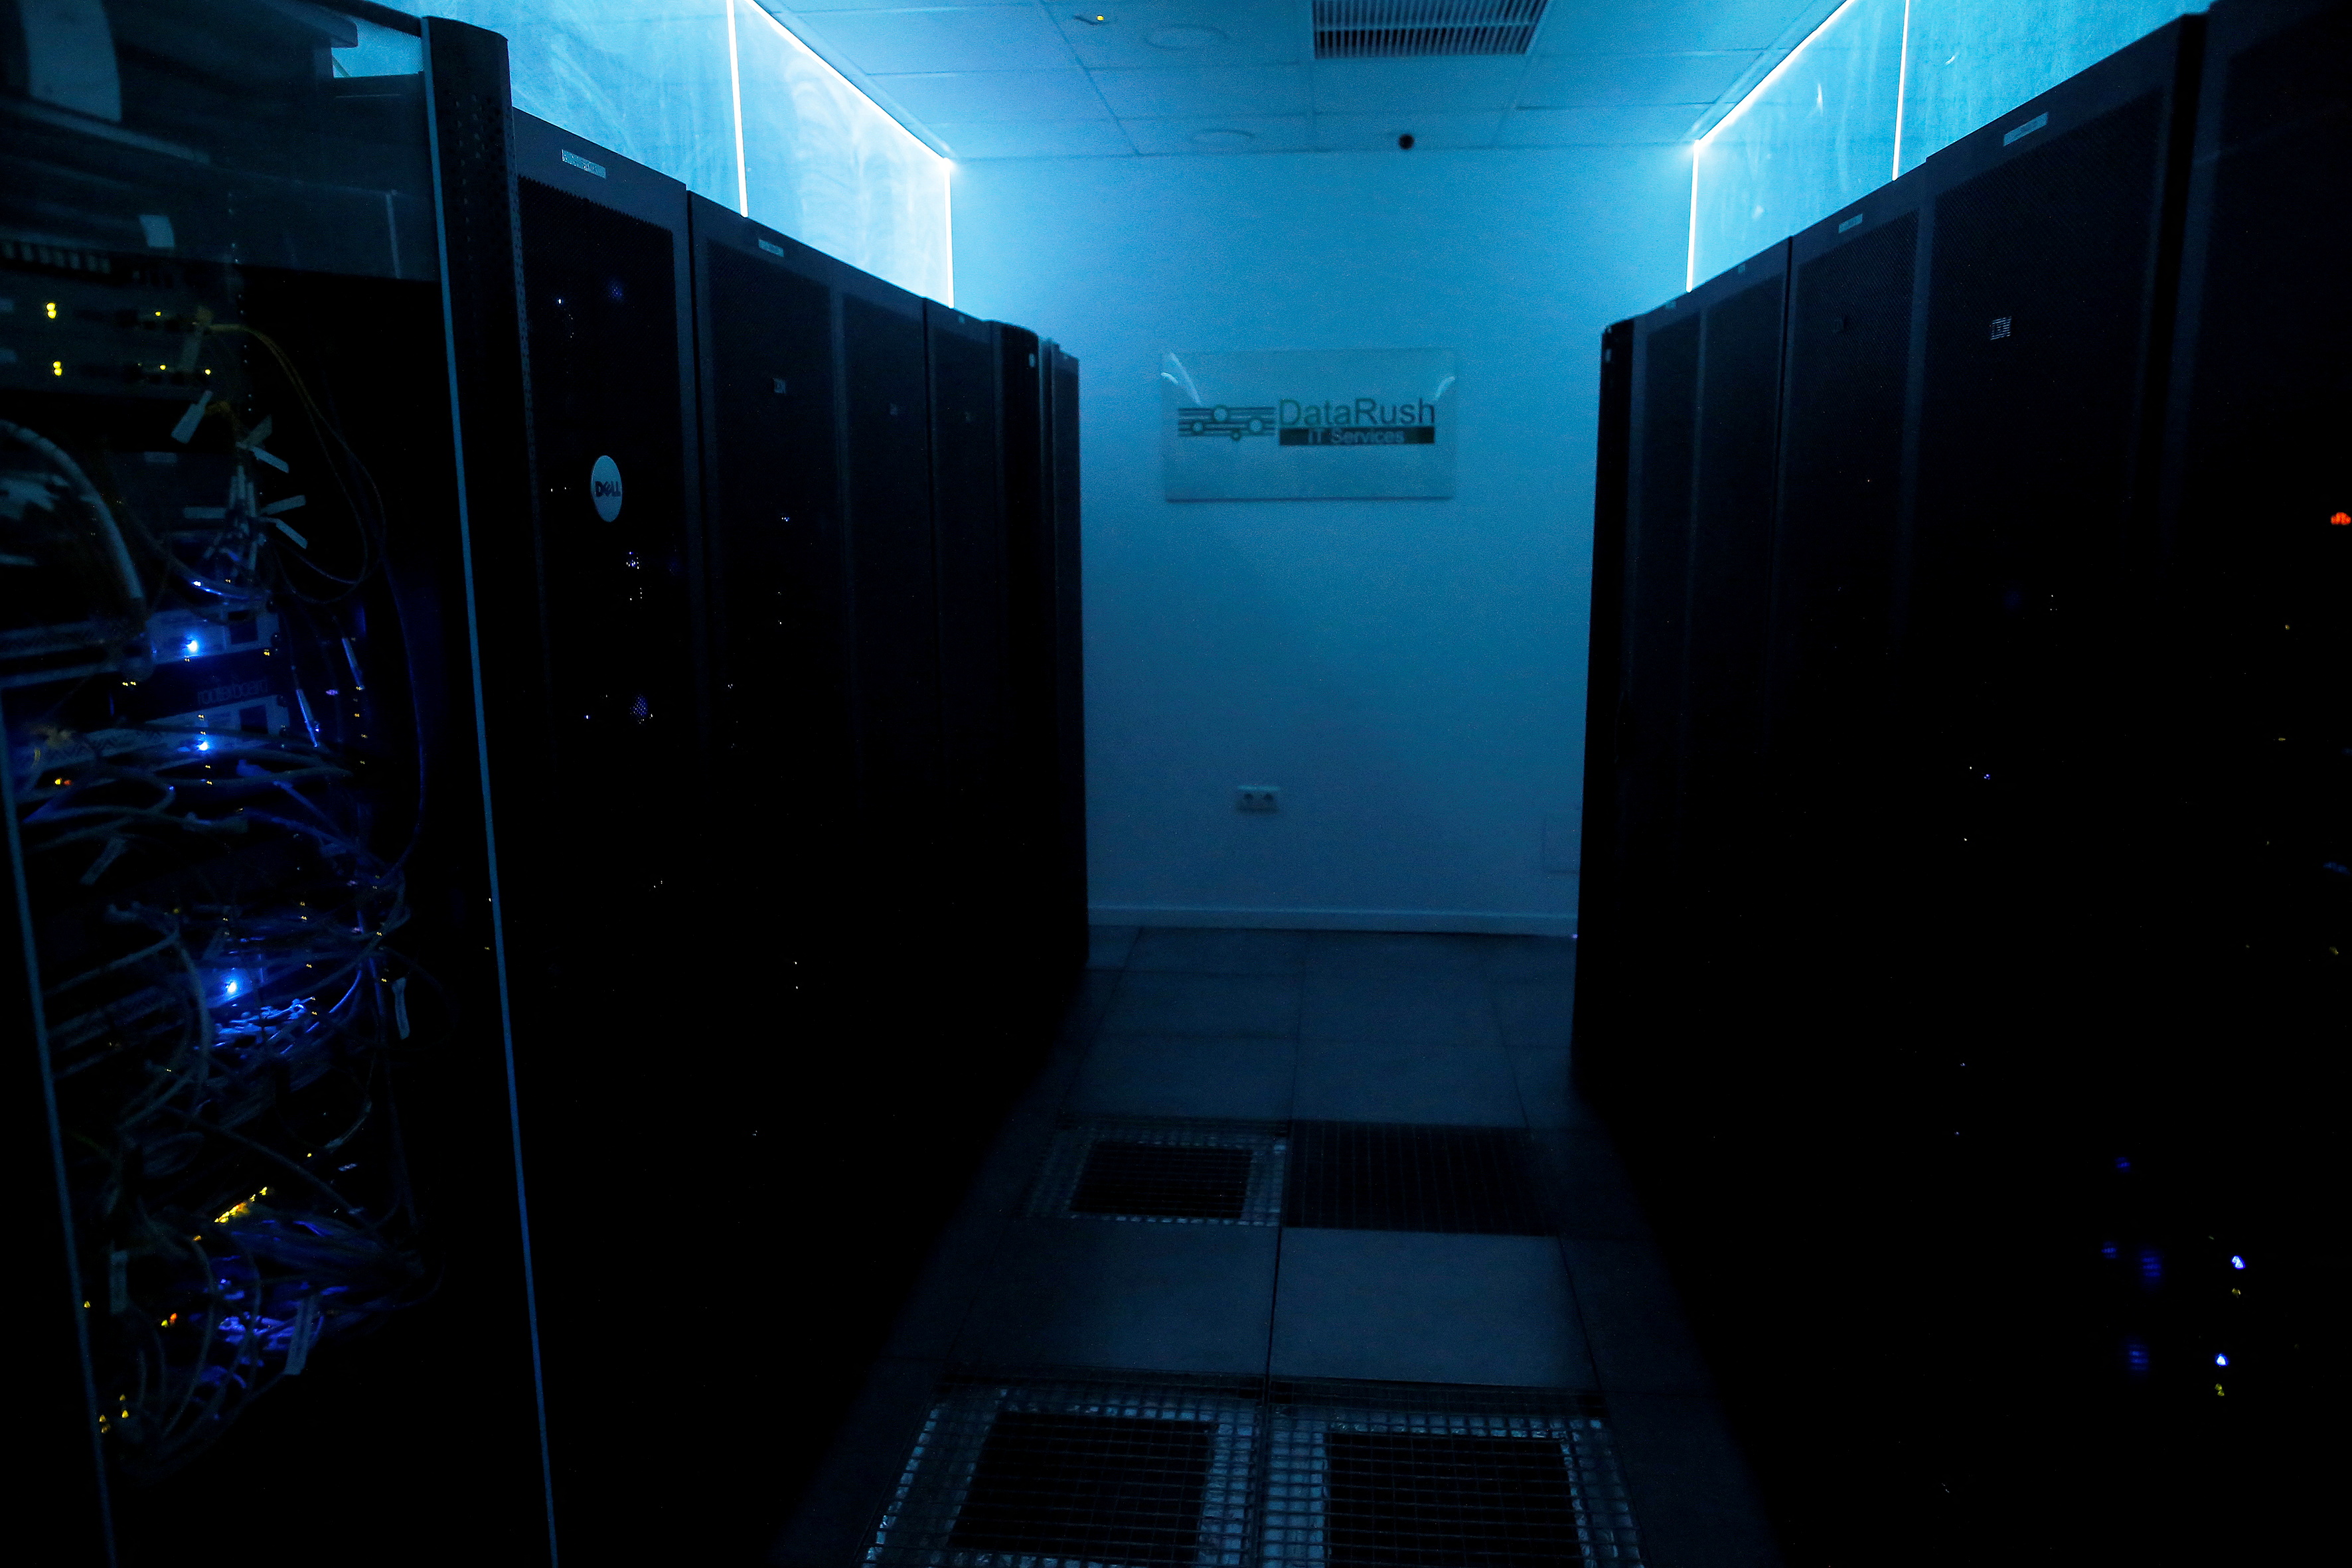 A data center is pictured at DataRush IT Services company in Malaga